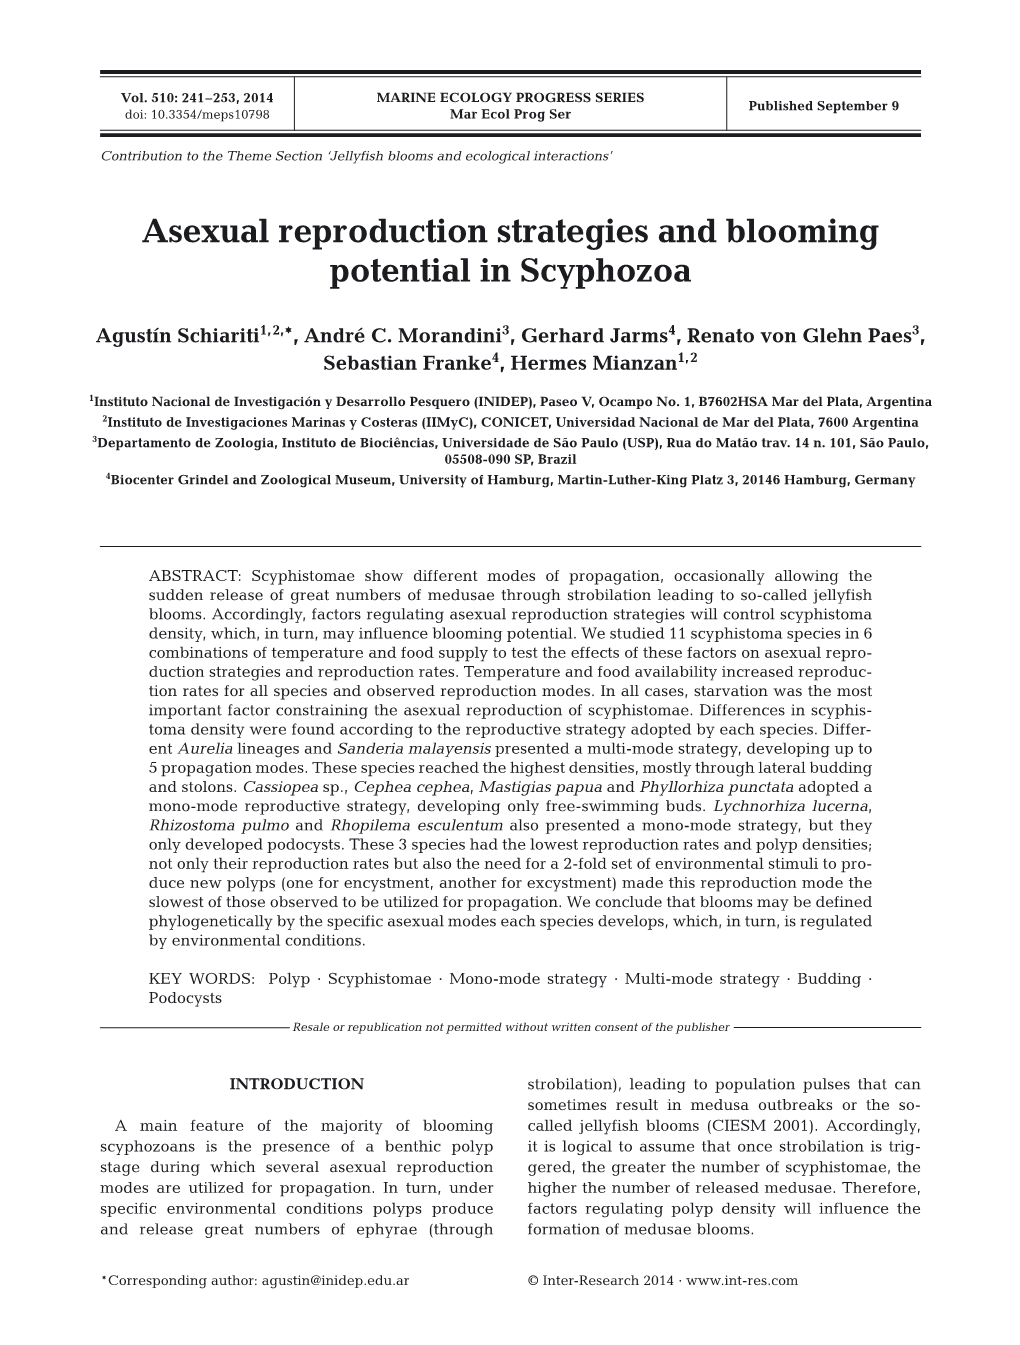 Asexual Reproduction Strategies and Blooming Potential in Scyphozoa